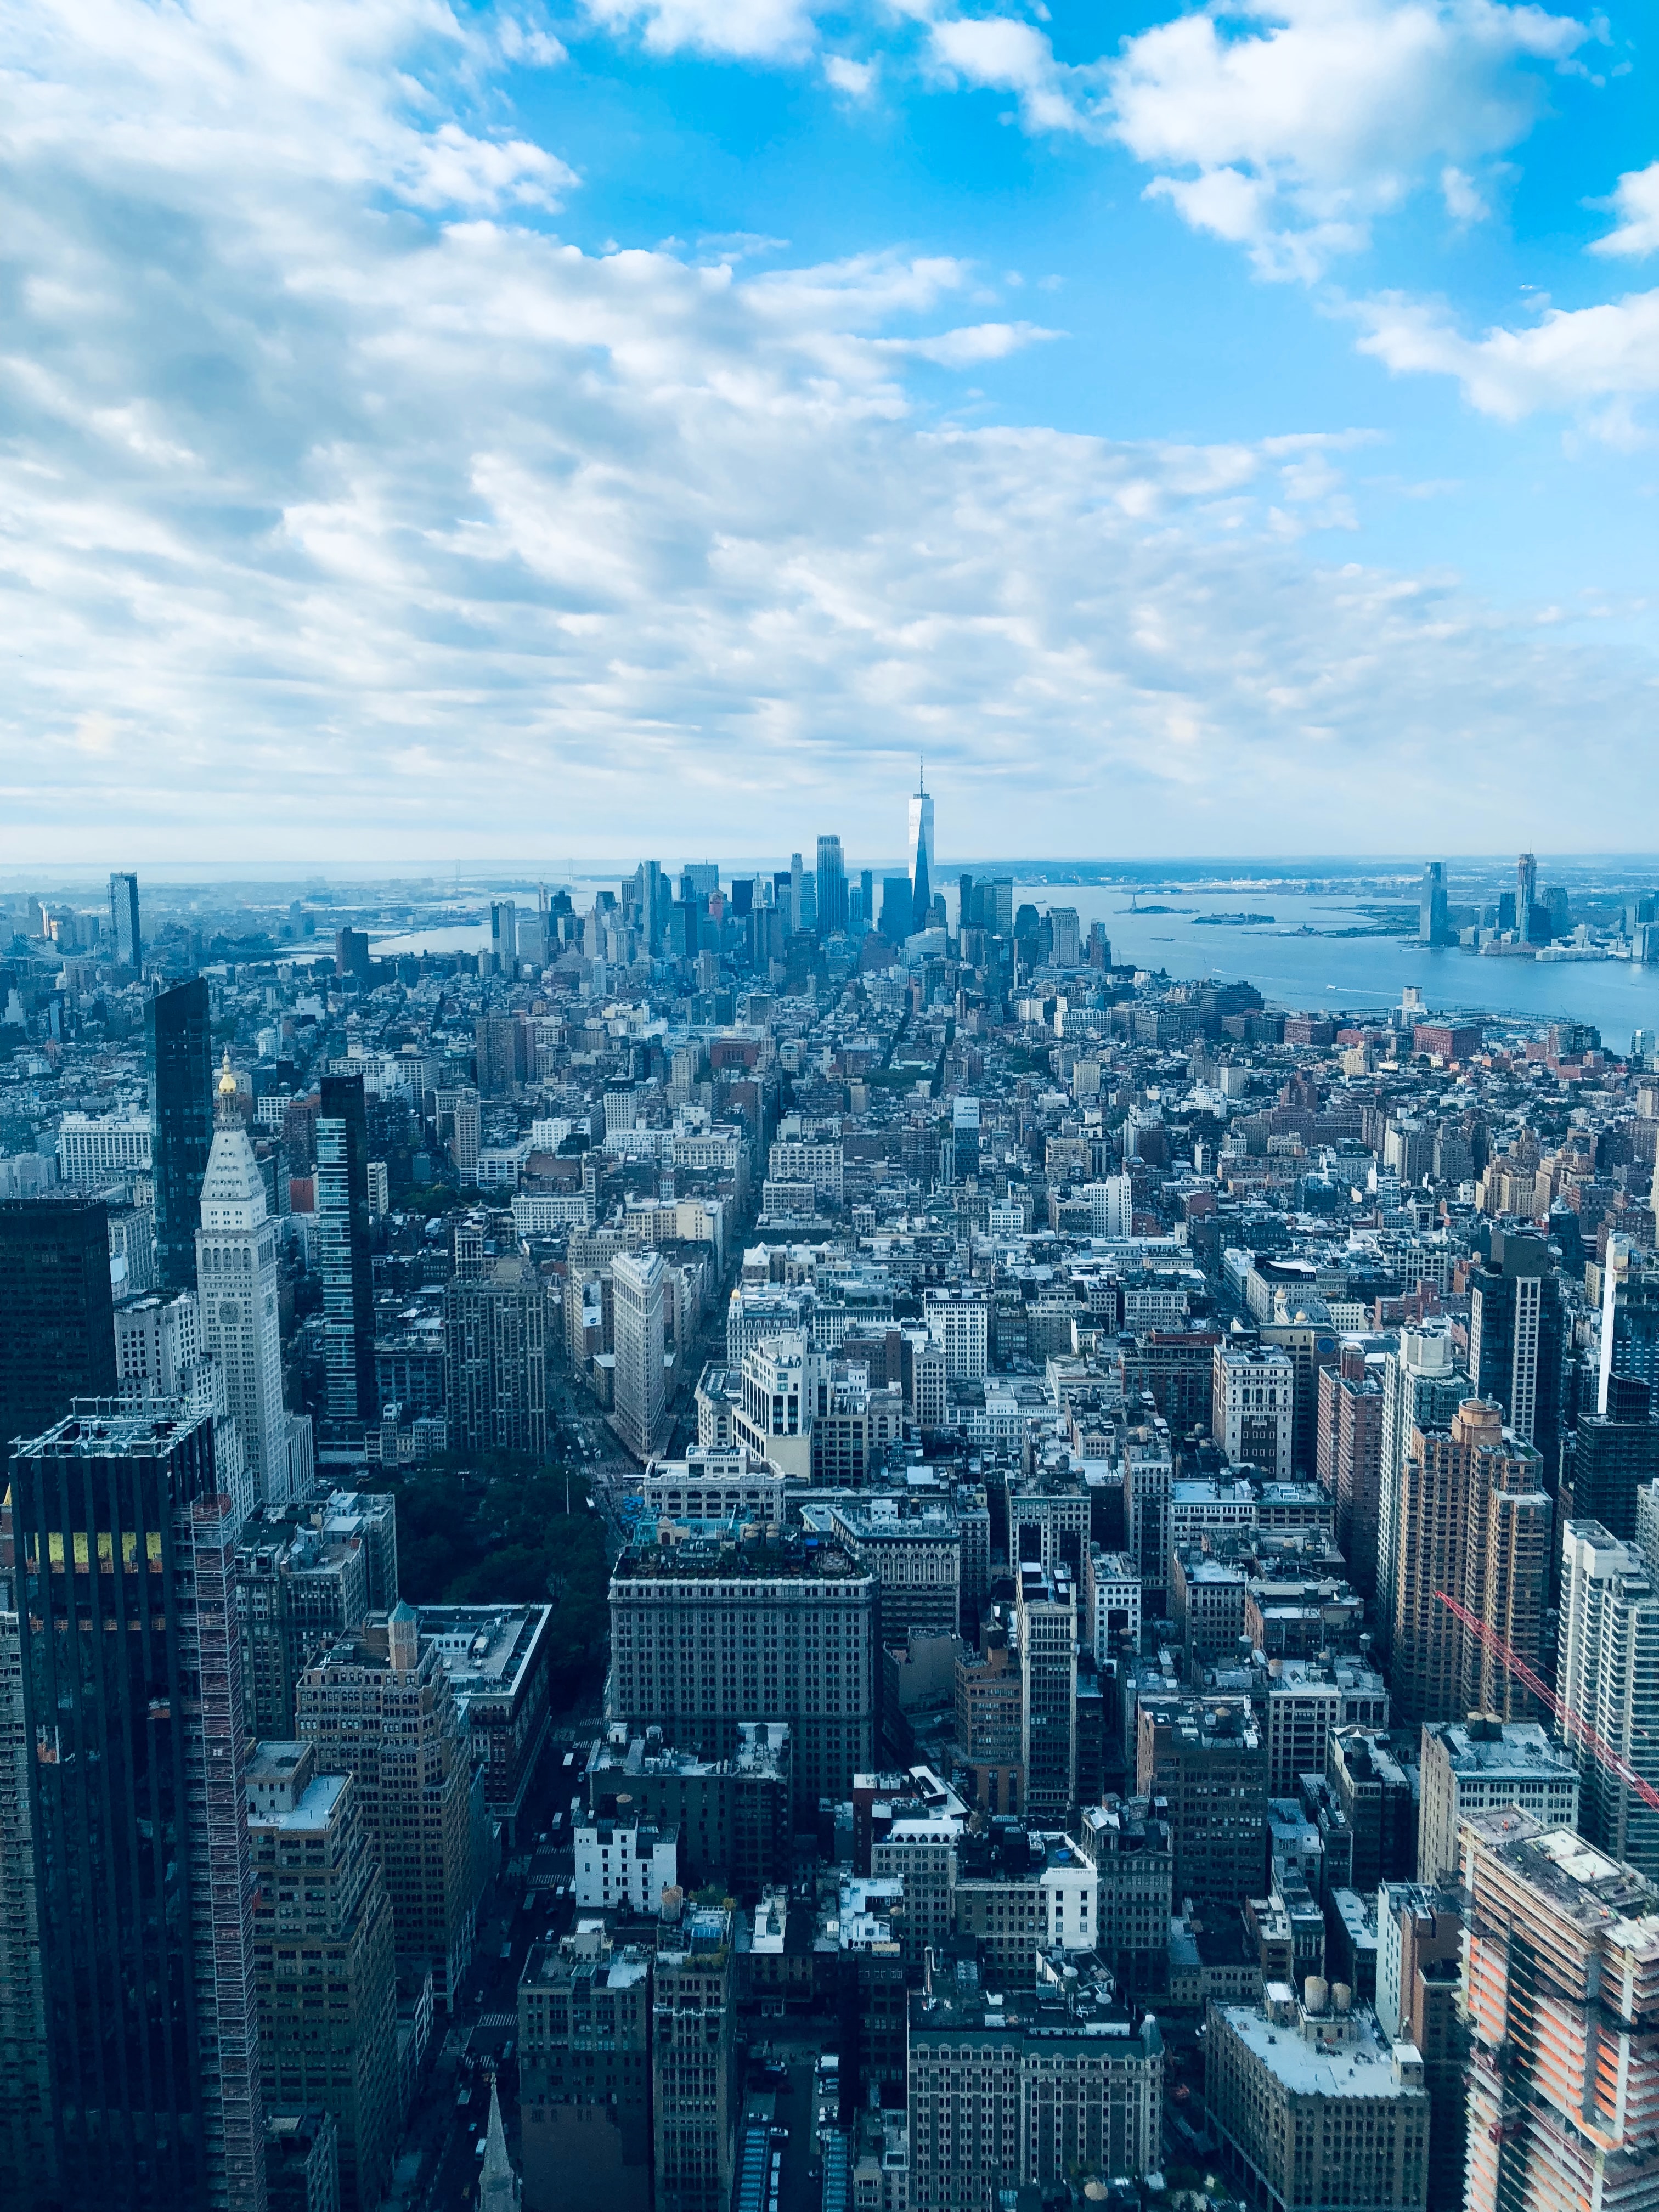 android new york, urban landscape, cities, city, building, view from above, megapolis, megalopolis, cityscape